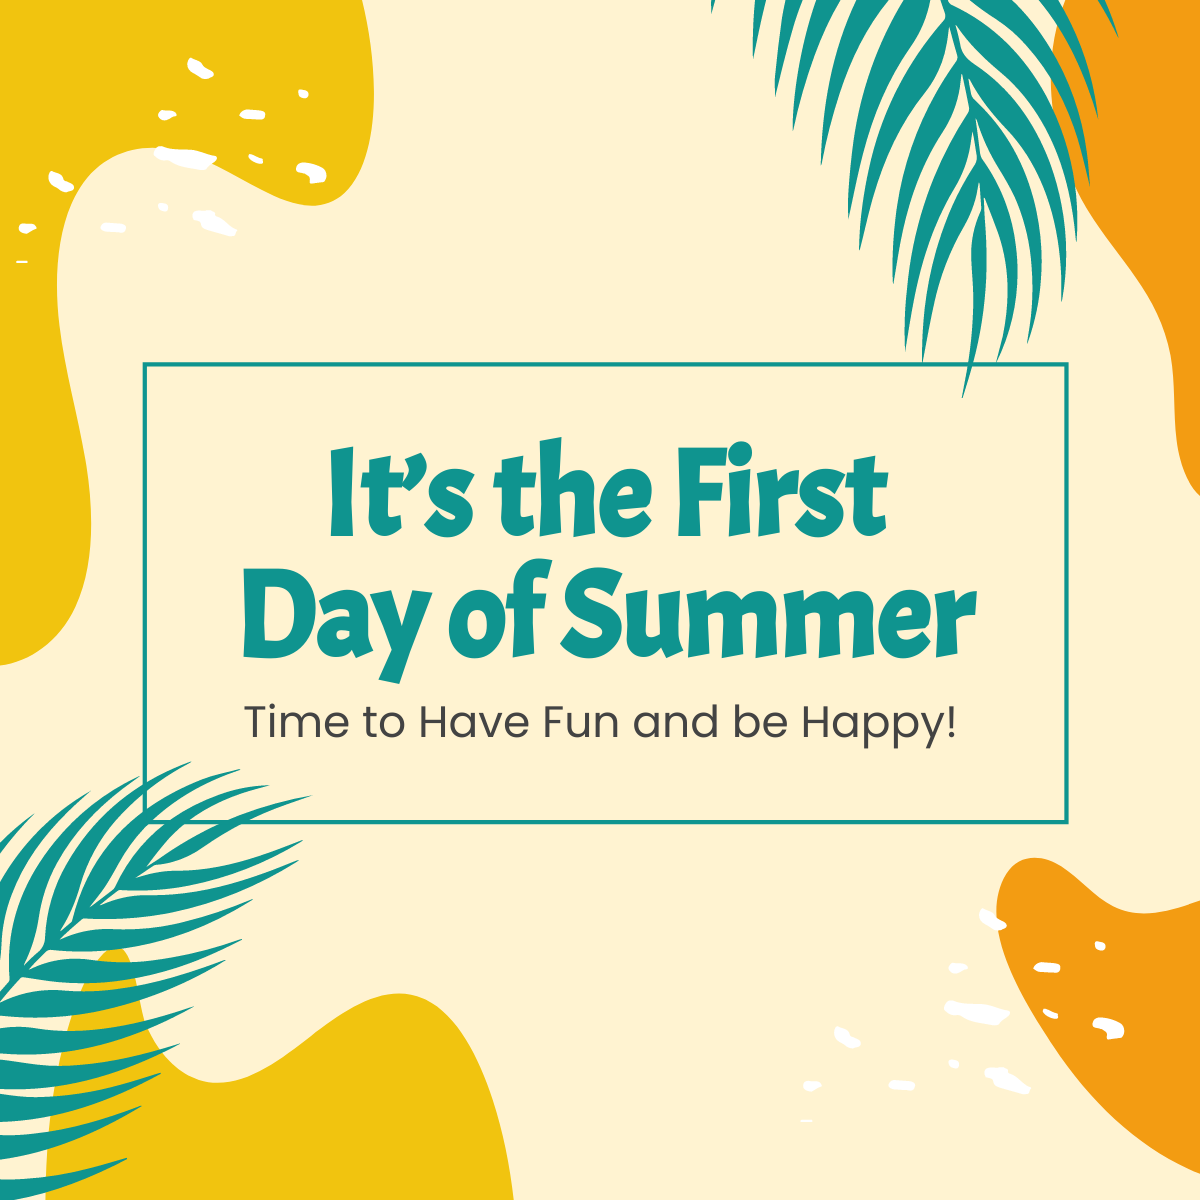 Happy First Day of Summer Linkedin Post Template